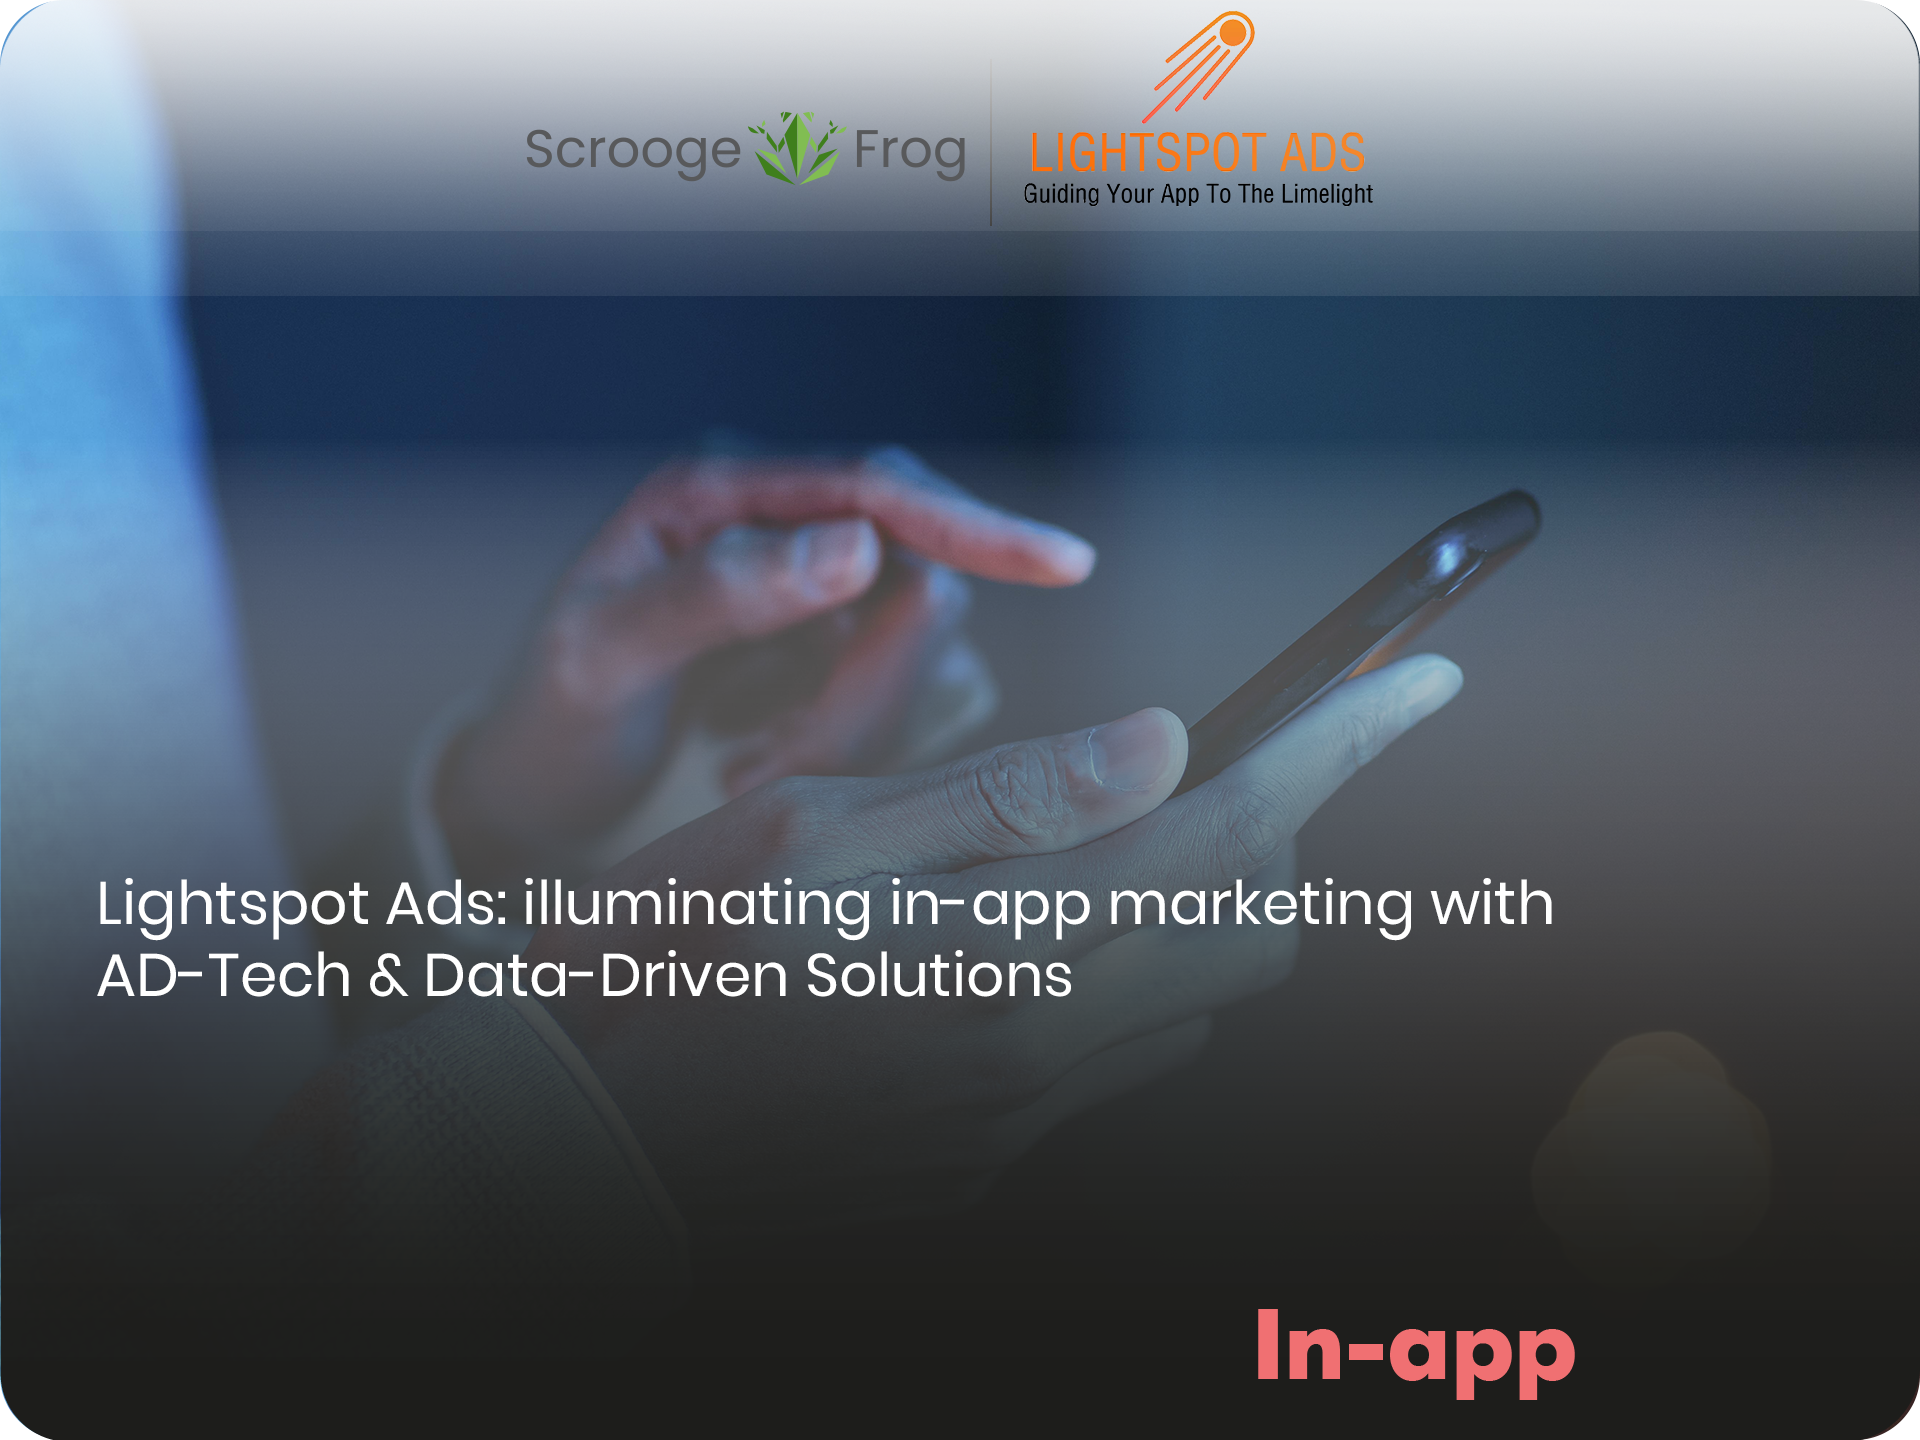 Lightspot Ads: illuminating in-app marketing with AD-Tech & Data-Driven Solutions